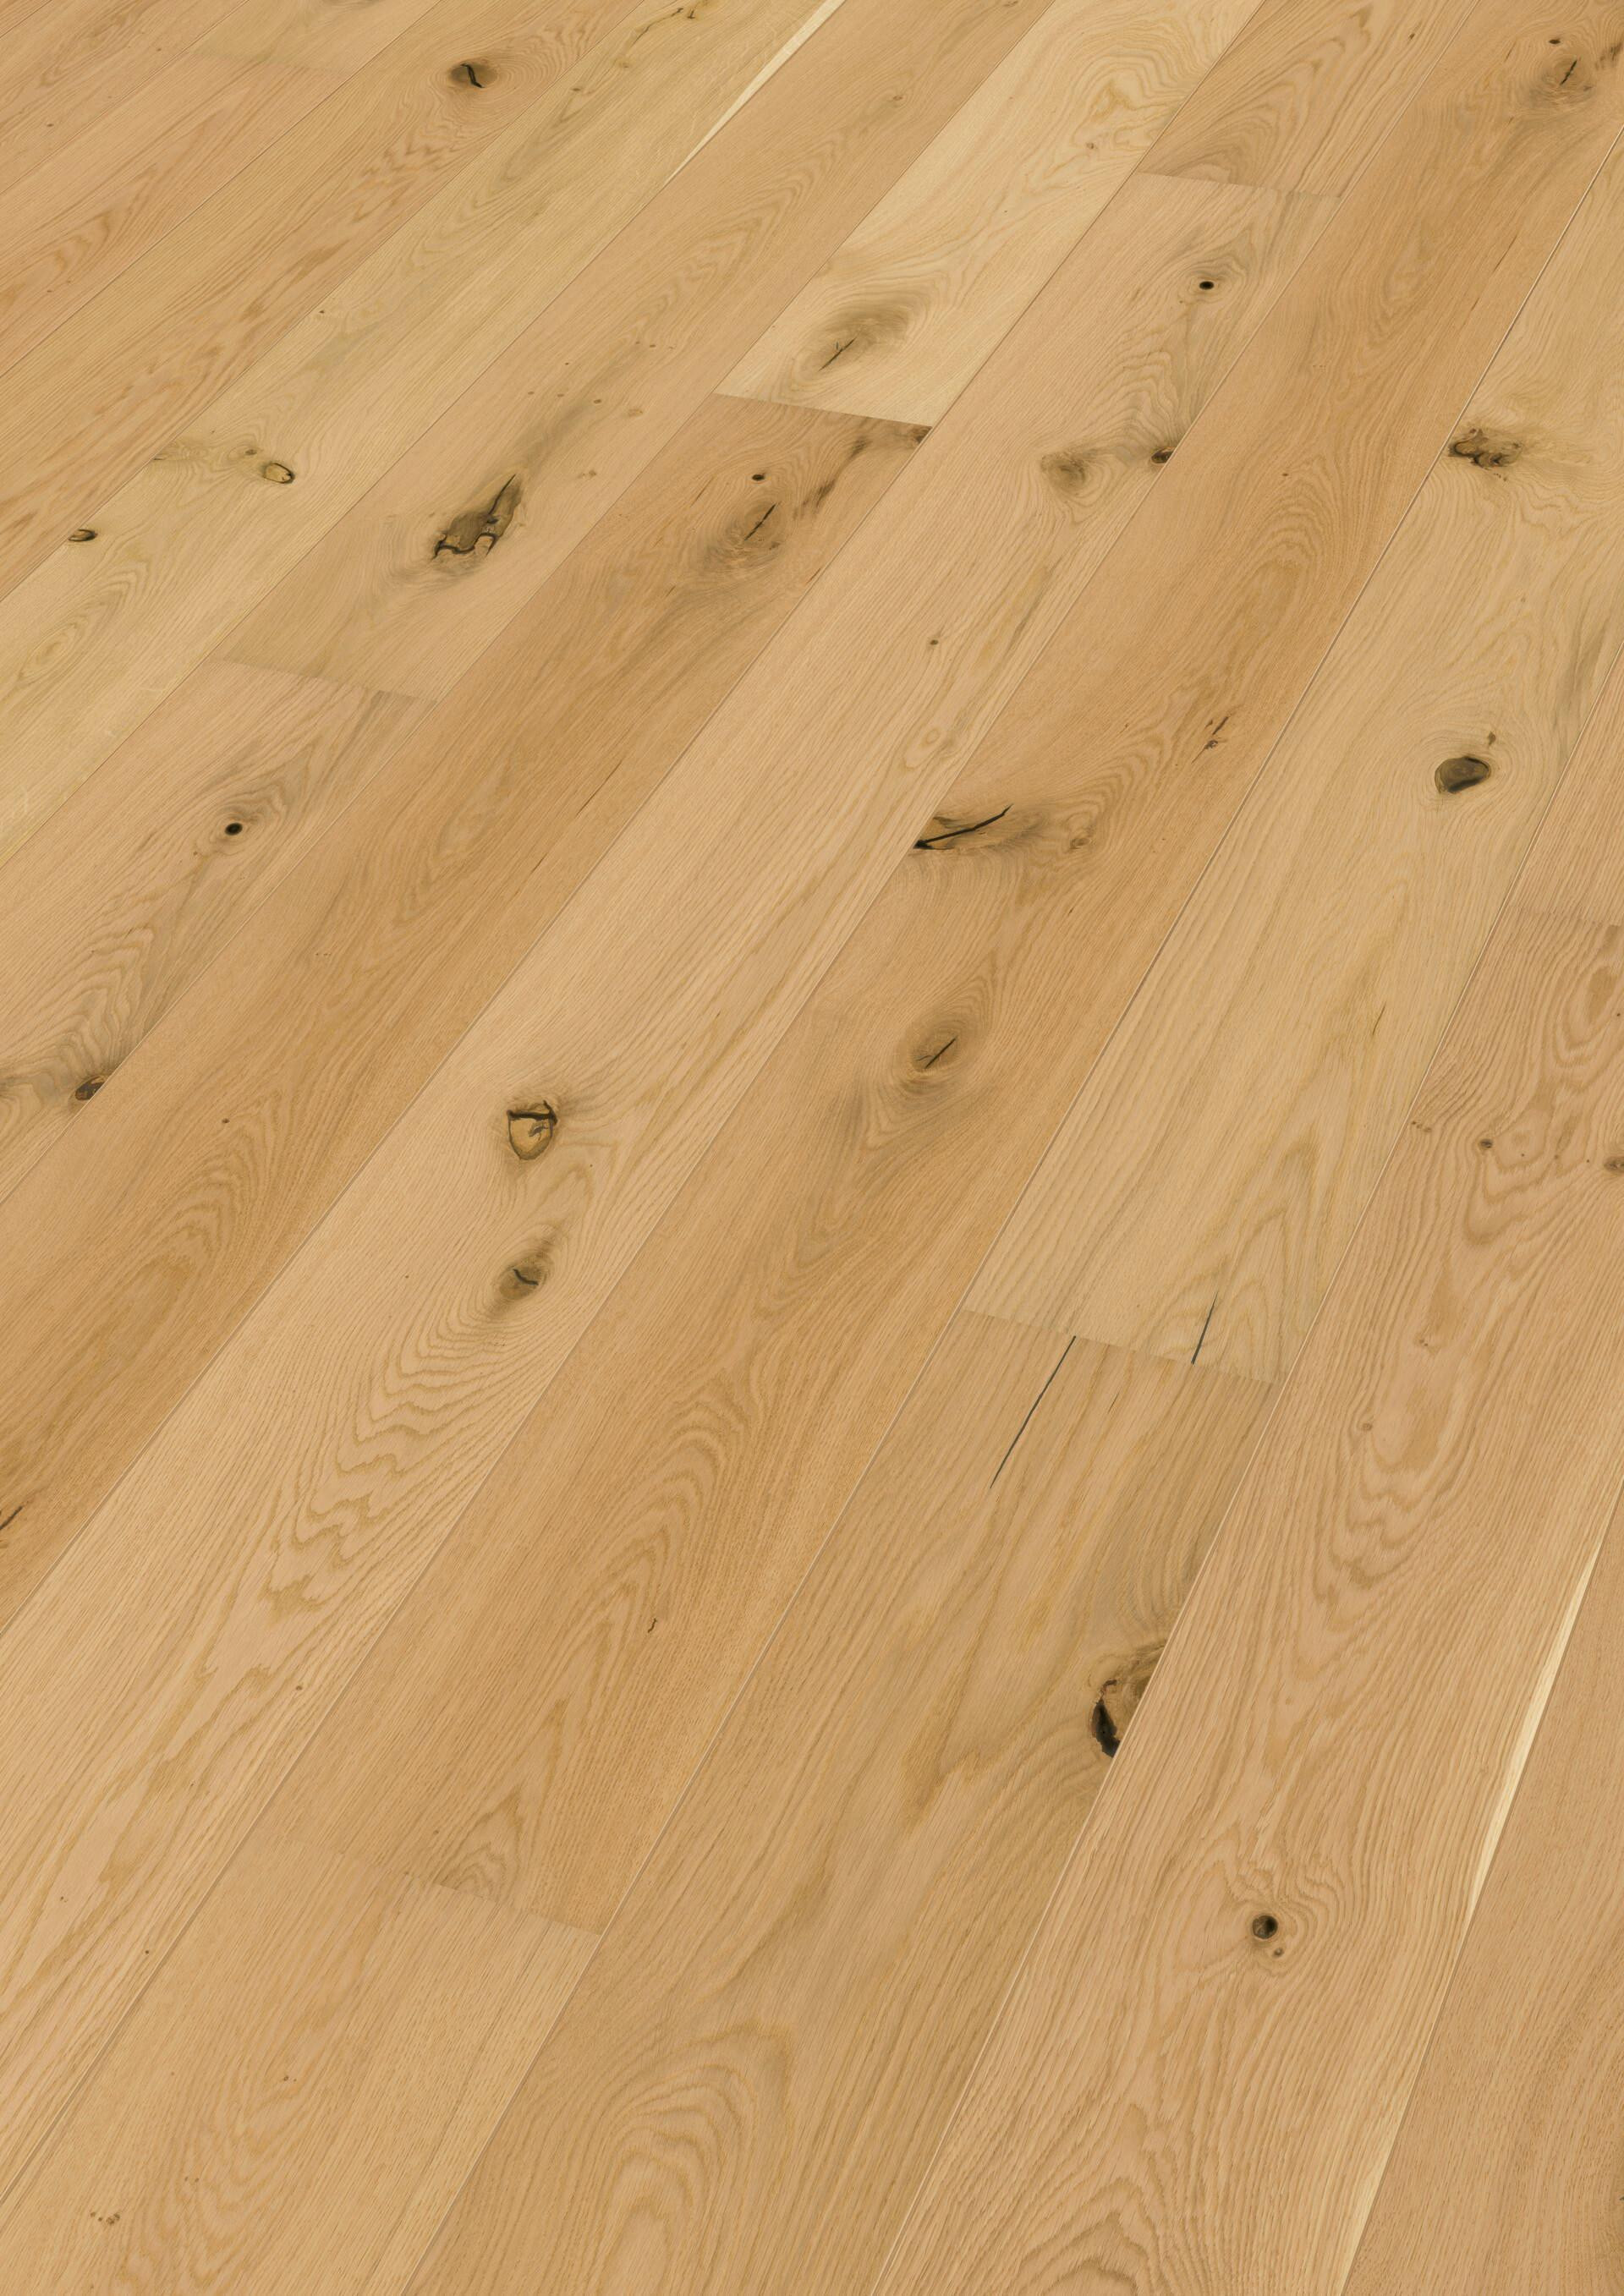 MEIS PD200 Authentic rustic oak 8645 brushed  2200